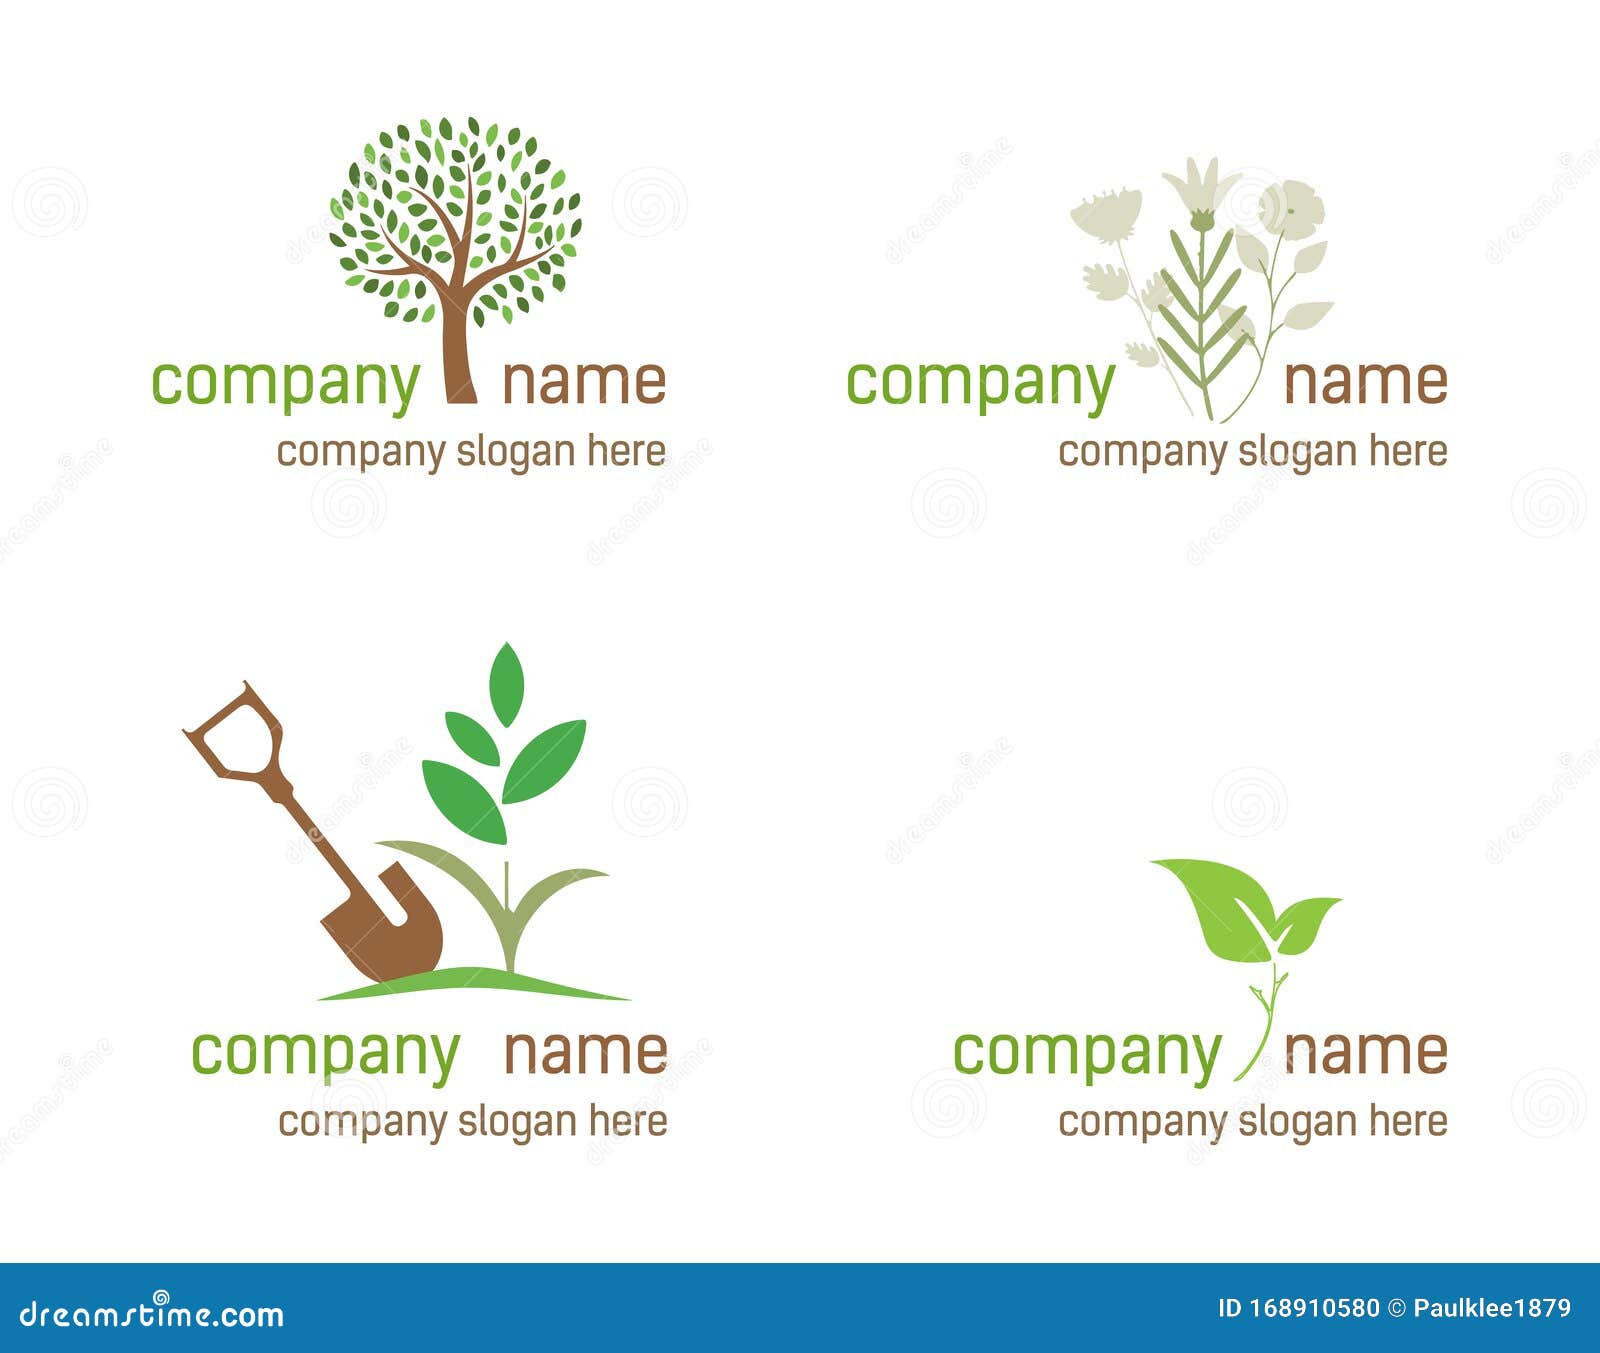 gardening and nature logos for companies.